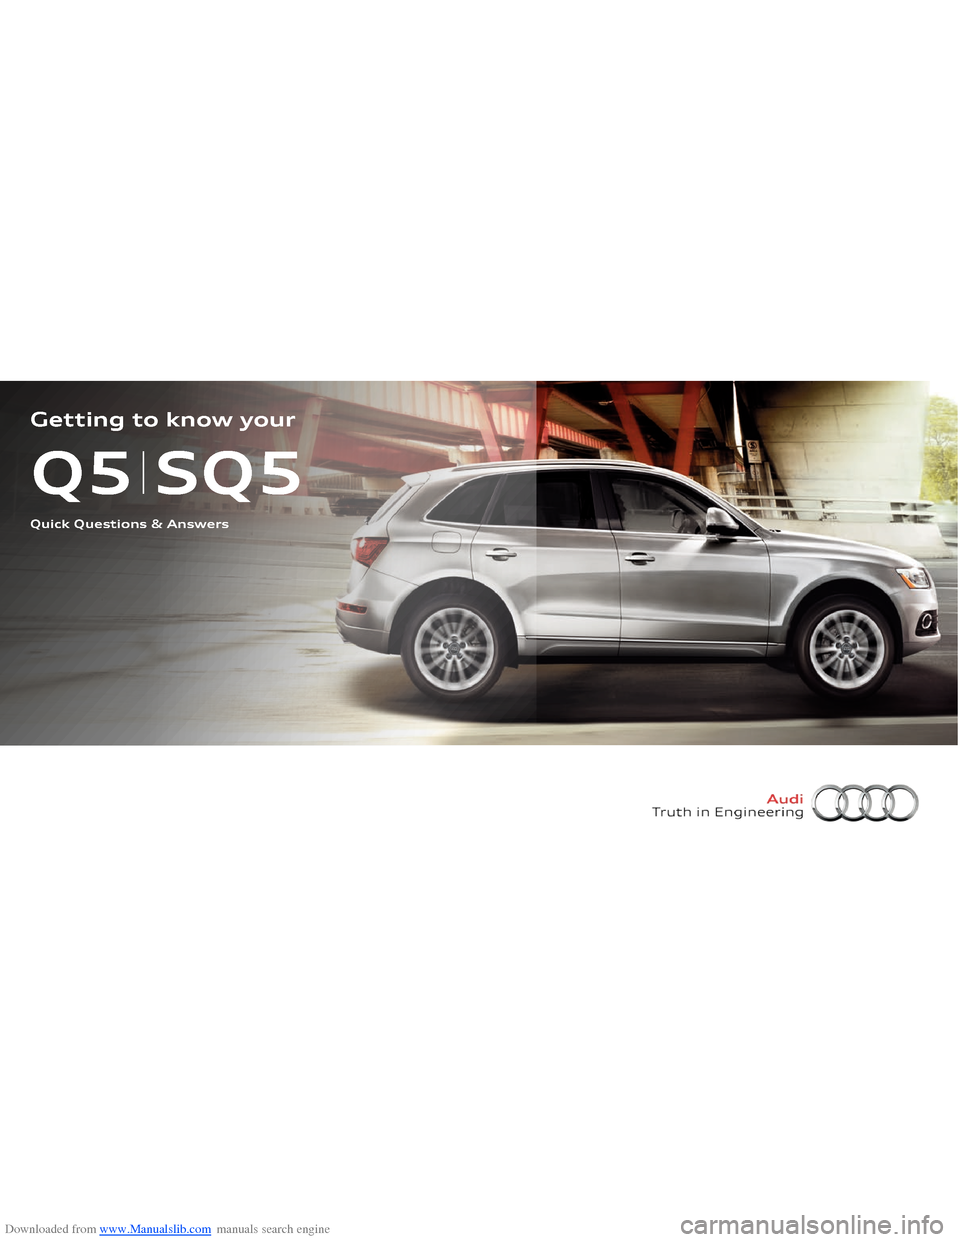 AUDI Q5 2014 8R / 1.G Getting To Know Downloaded from www.Manualslib.com manuals search engine Q5 SQ5Quick Questions & AnswersGetting to know your   